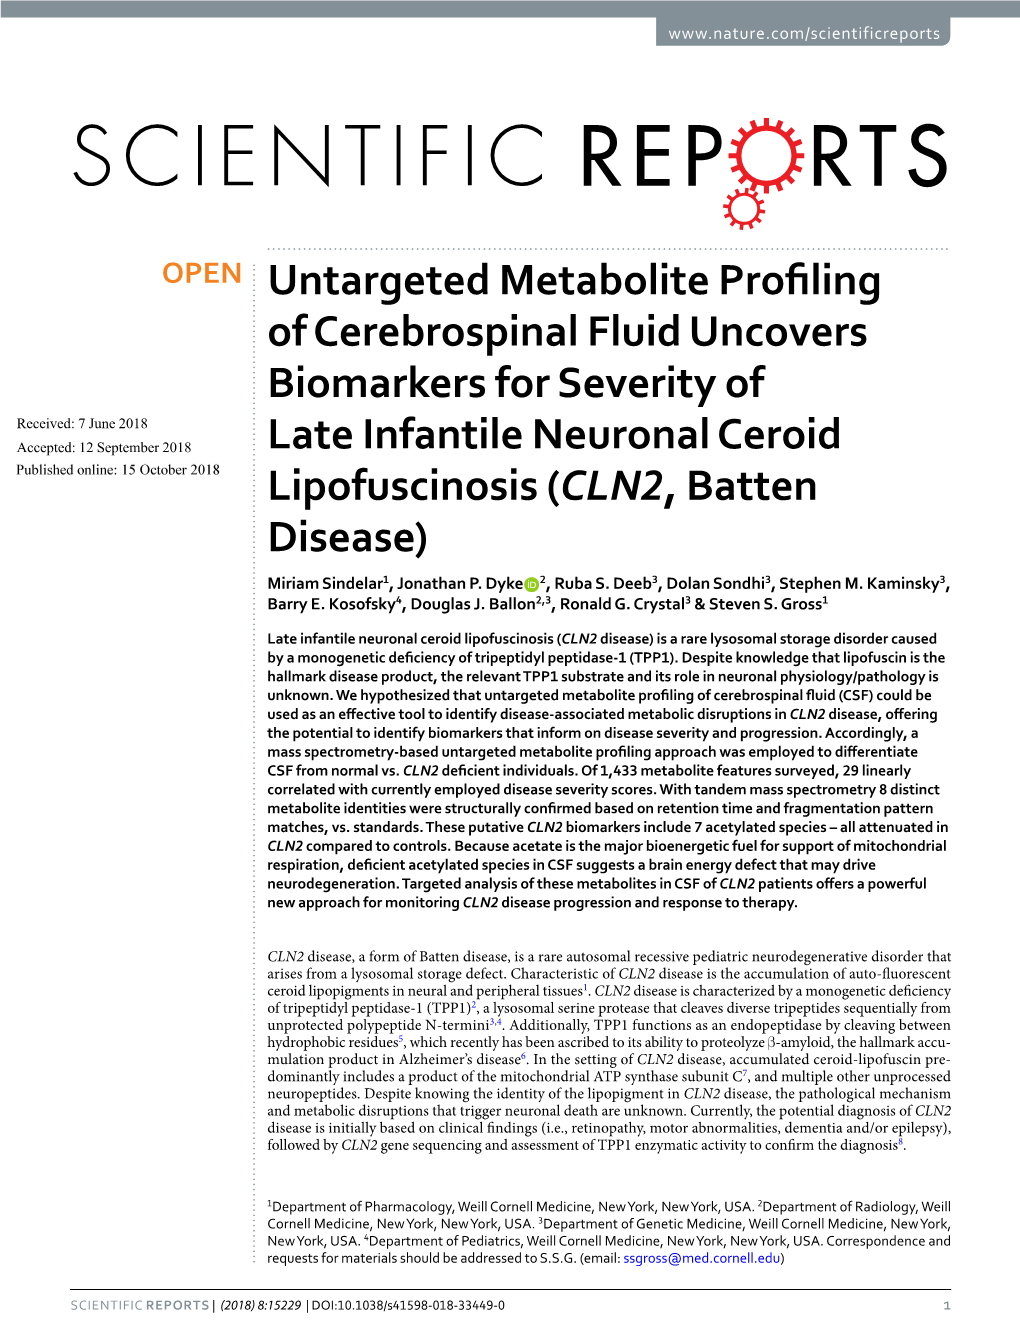 Untargeted Metabolite Profiling of Cerebrospinal Fluid Uncovers Biomarkers for Severity of Late Infantile Neuronal Ceroid Lipofu